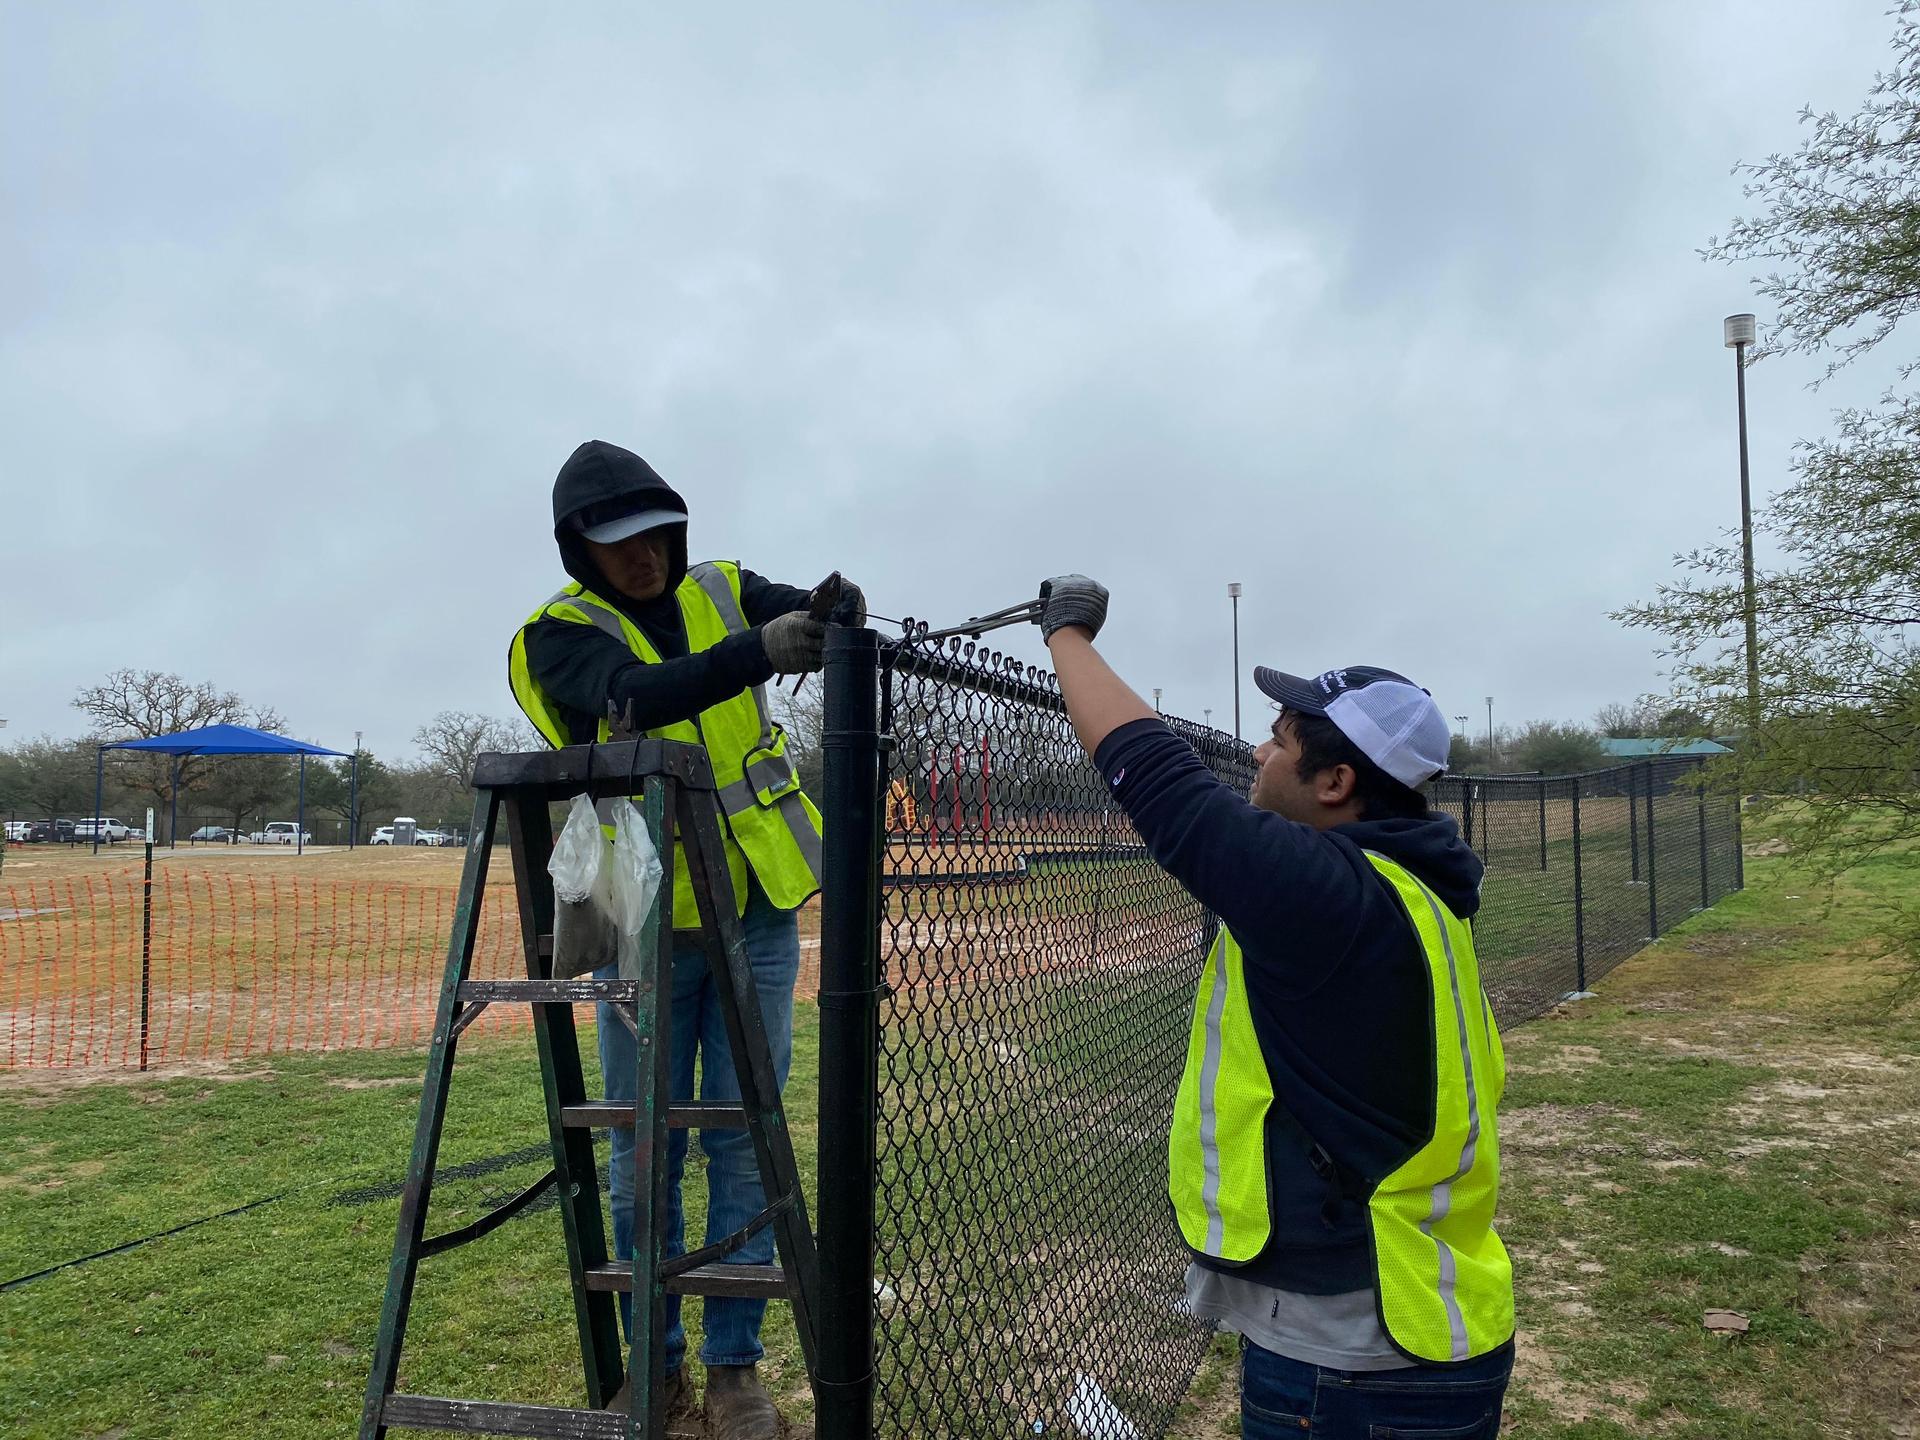 2 construction workers setting up a wire fence